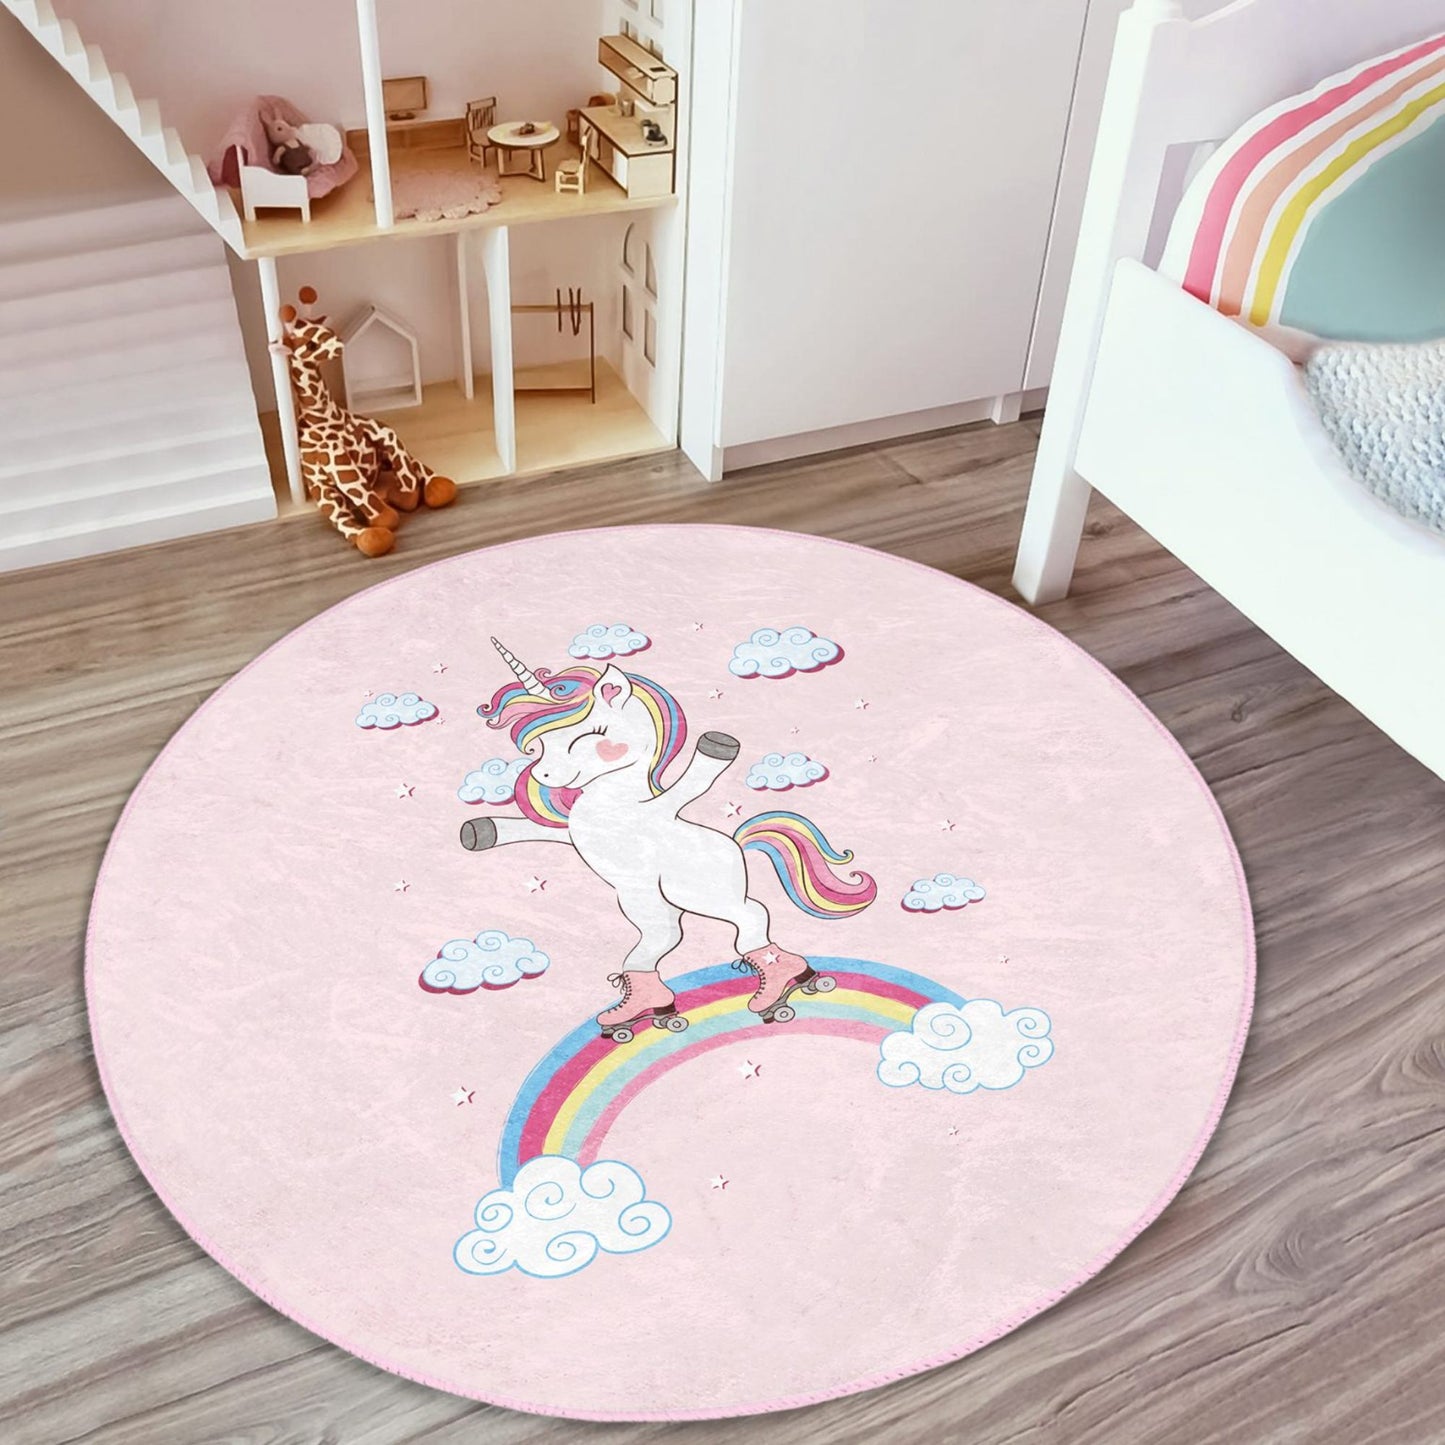 Homeezone's Unicorn on the Clouds Patterned Kids' Room Pink Rug